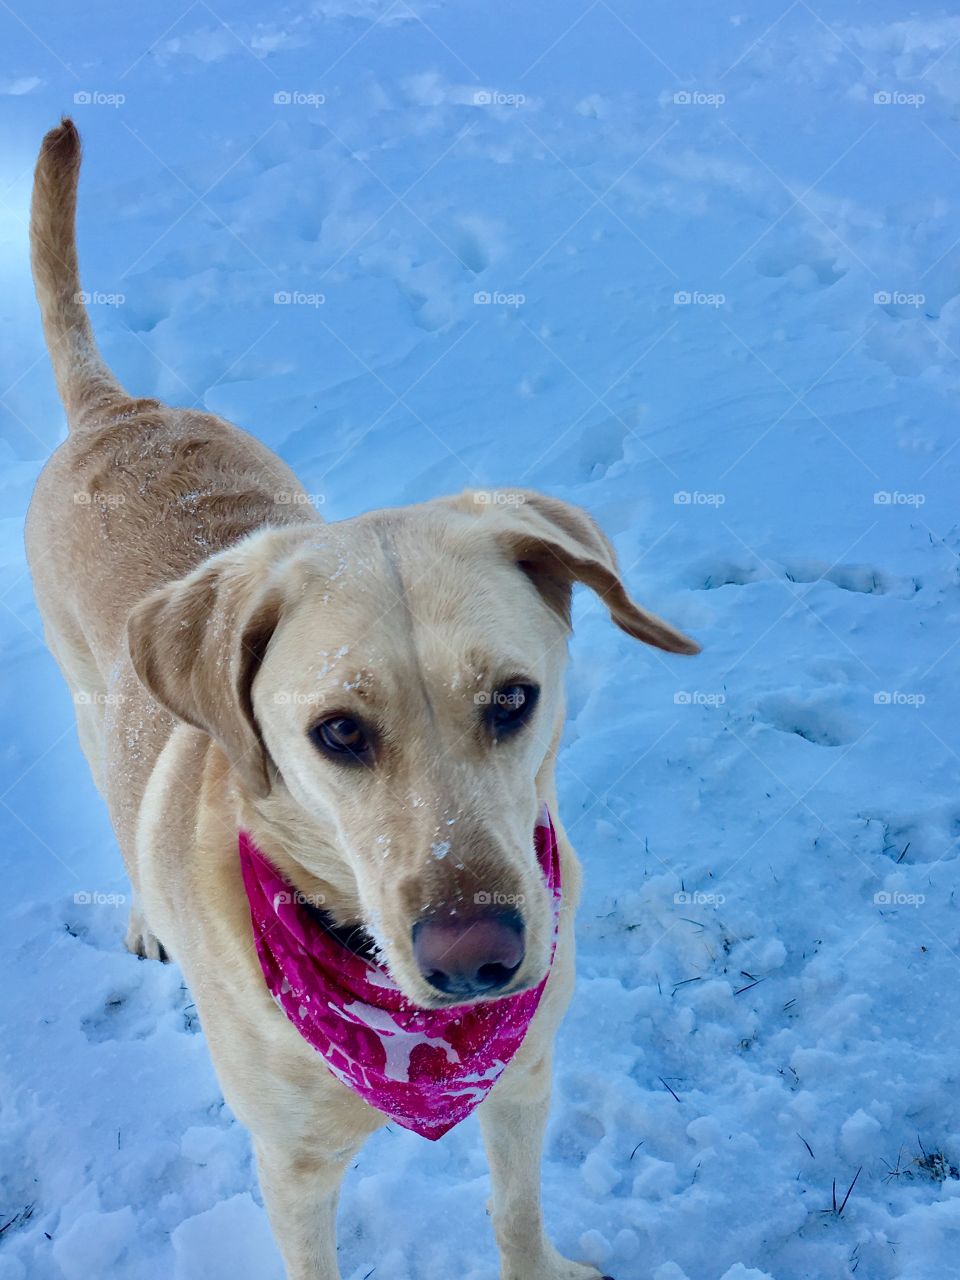 Puppy dog playing in the snow